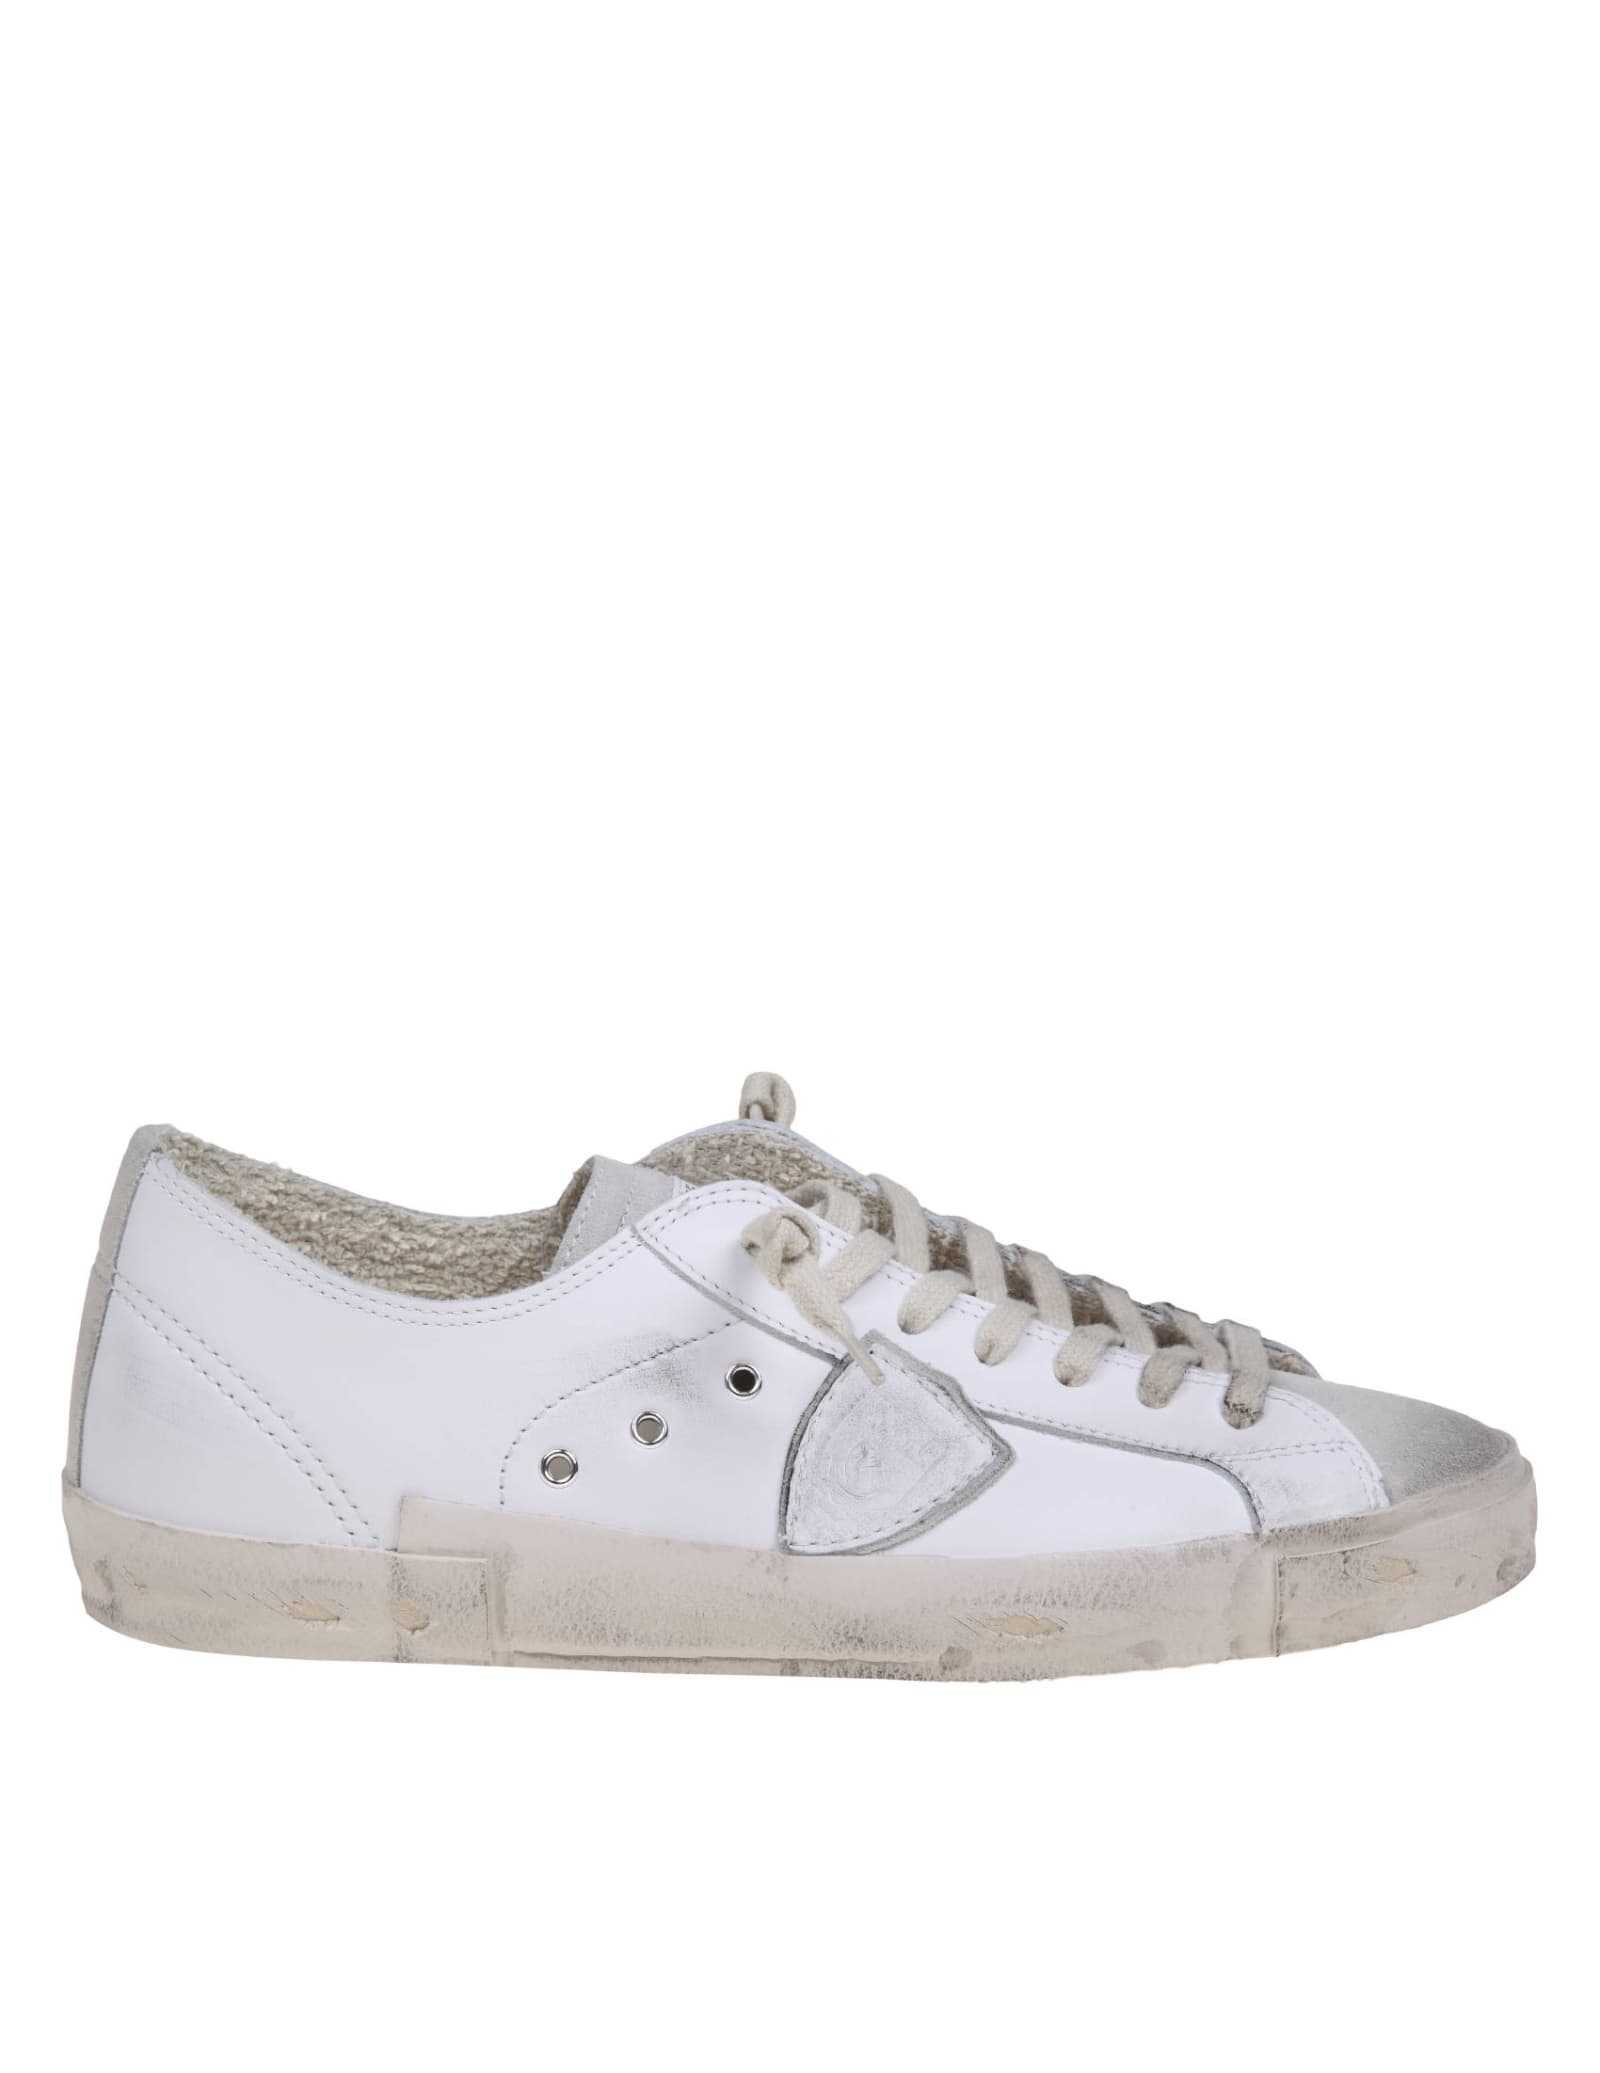 Prsx Low Sneakers In White Leather And Suede